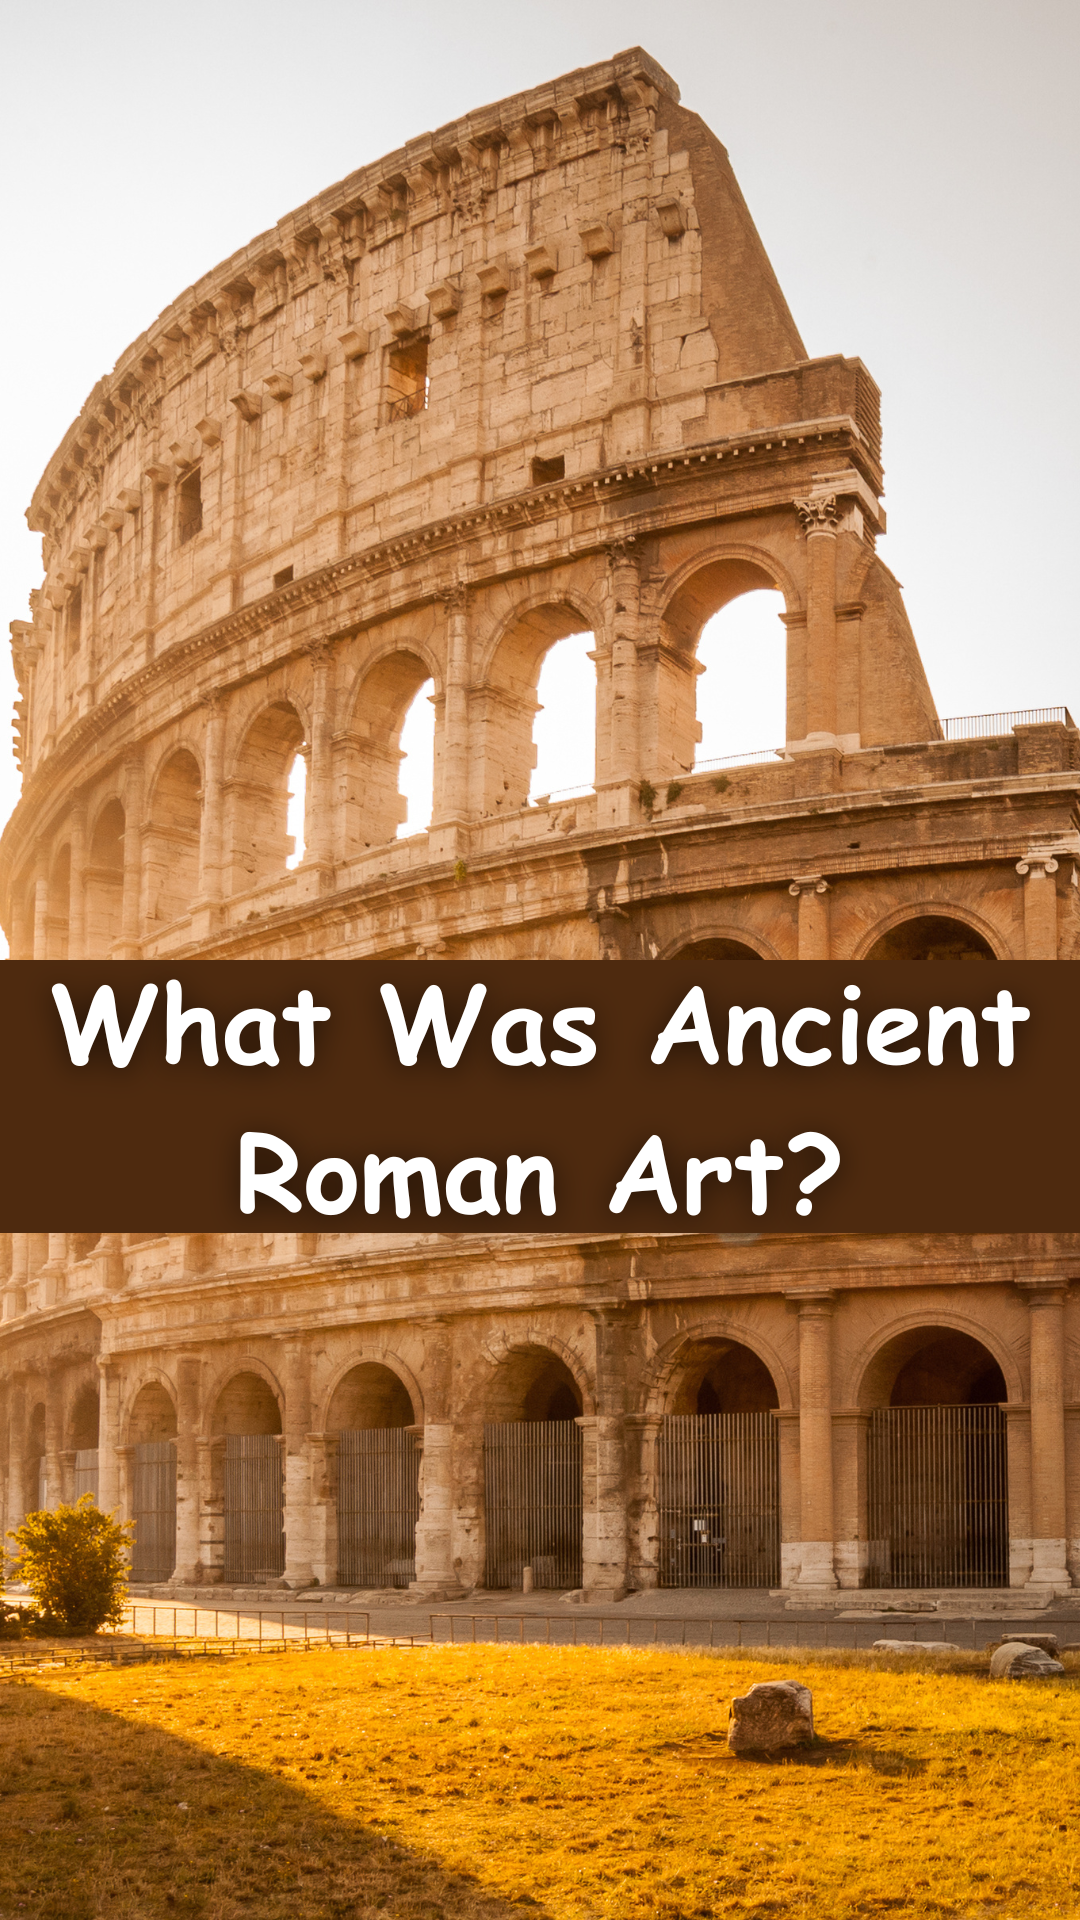 What Was Ancient Roman Art?